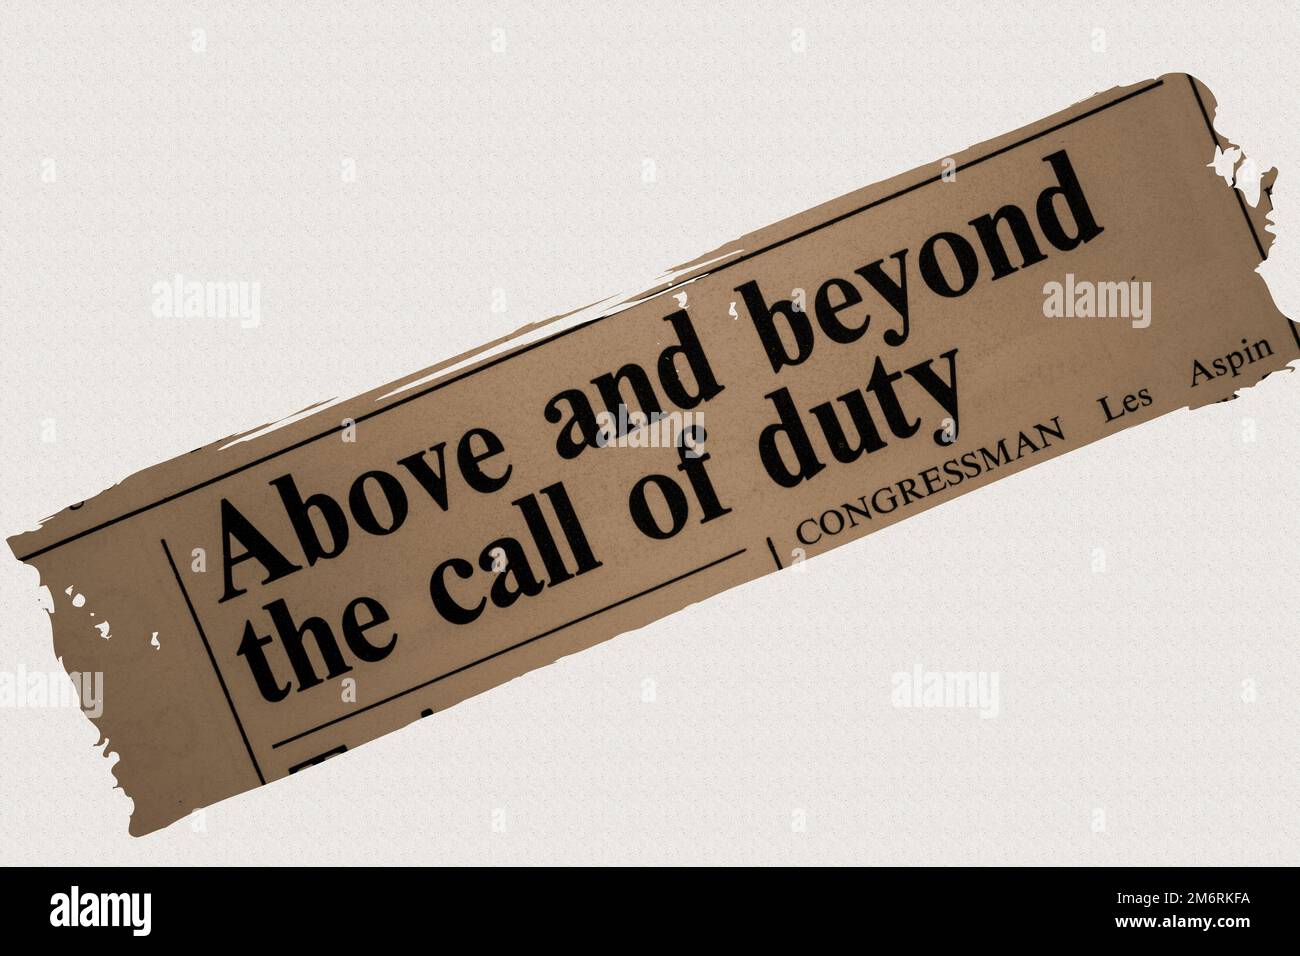 Above and beyond the call of duty - news story from 1975 newspaper headline article title - overlay sepia Stock Photo